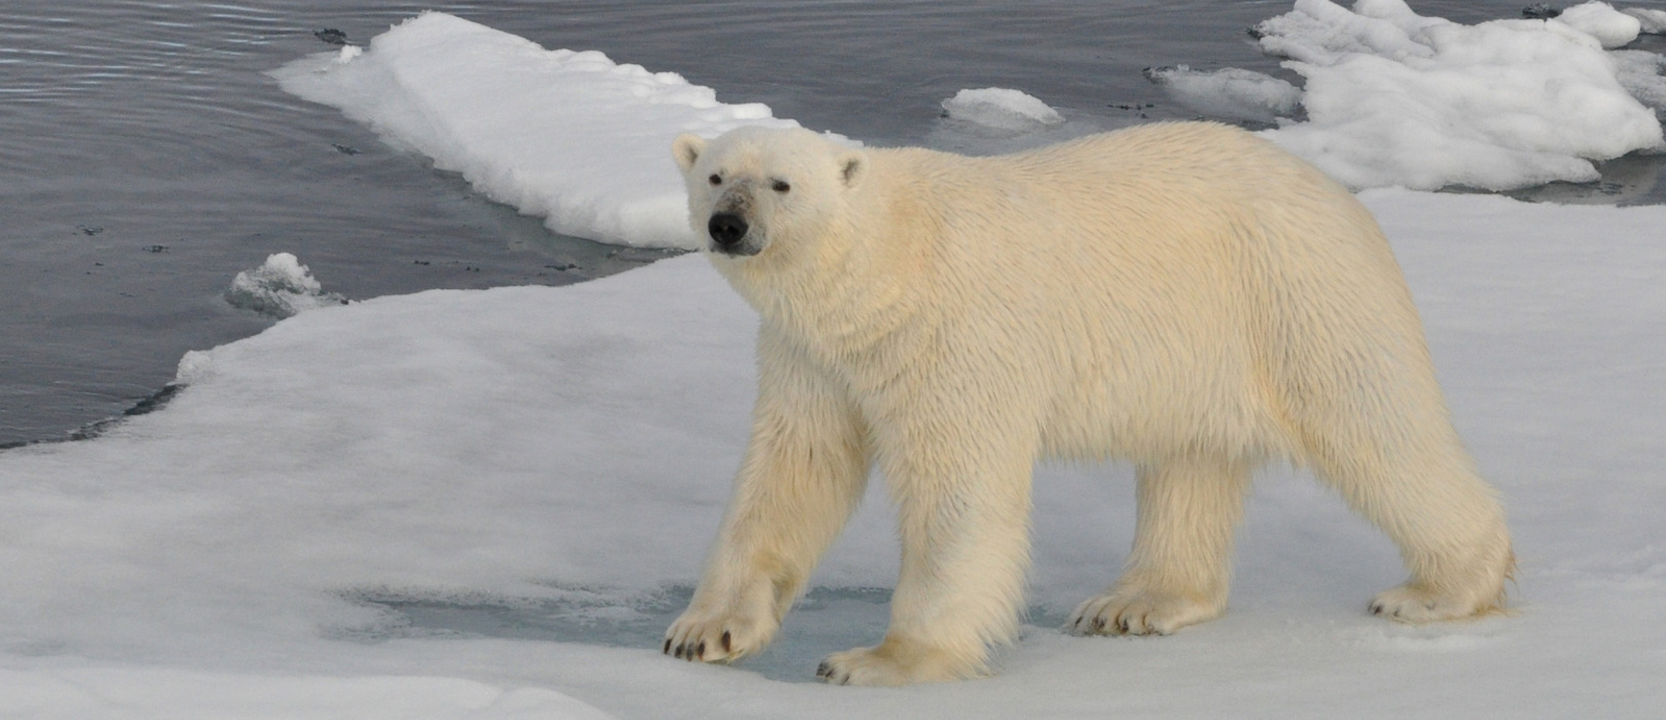 9 Day Scoresby Sund, Aurora Borealis , Iceland and Greenland the teritory of the polar bears 